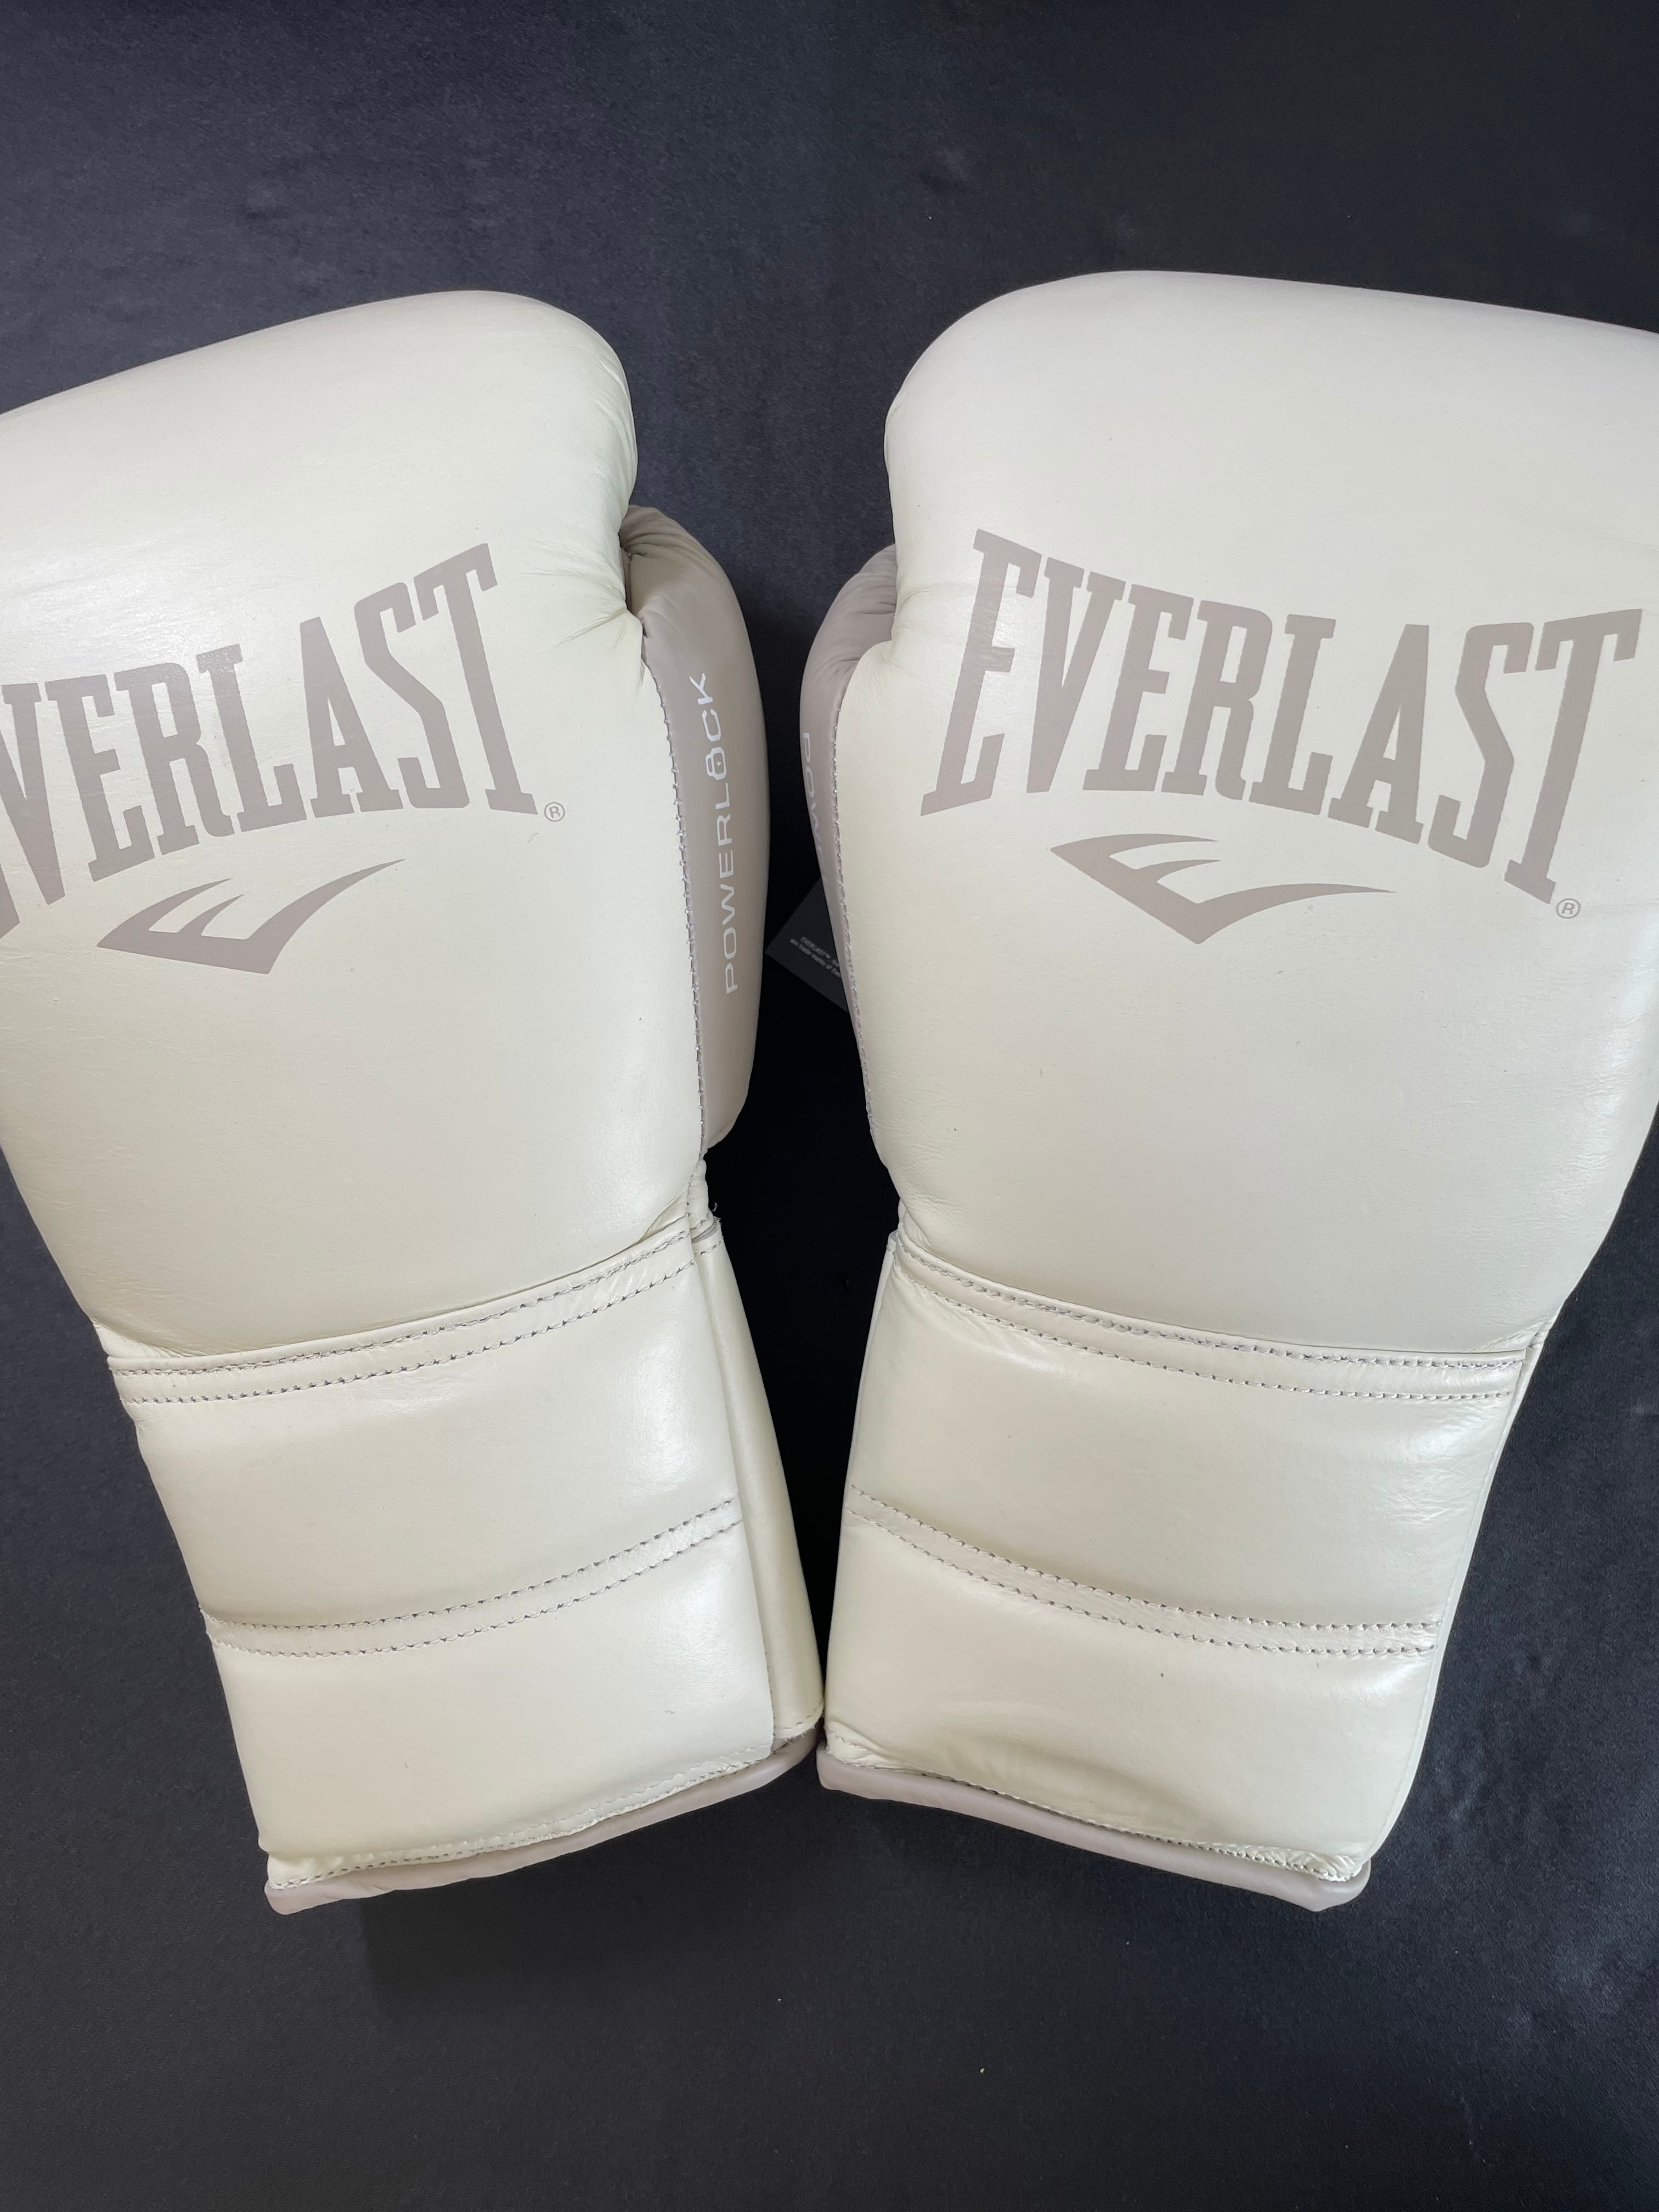 Everlastエバーラストパワーロック2プロトレーニンググローブPowerlock2 Pro Laced Training Gloves |  ボクシング格闘技専門店　OLDROOKIE powered by BASE